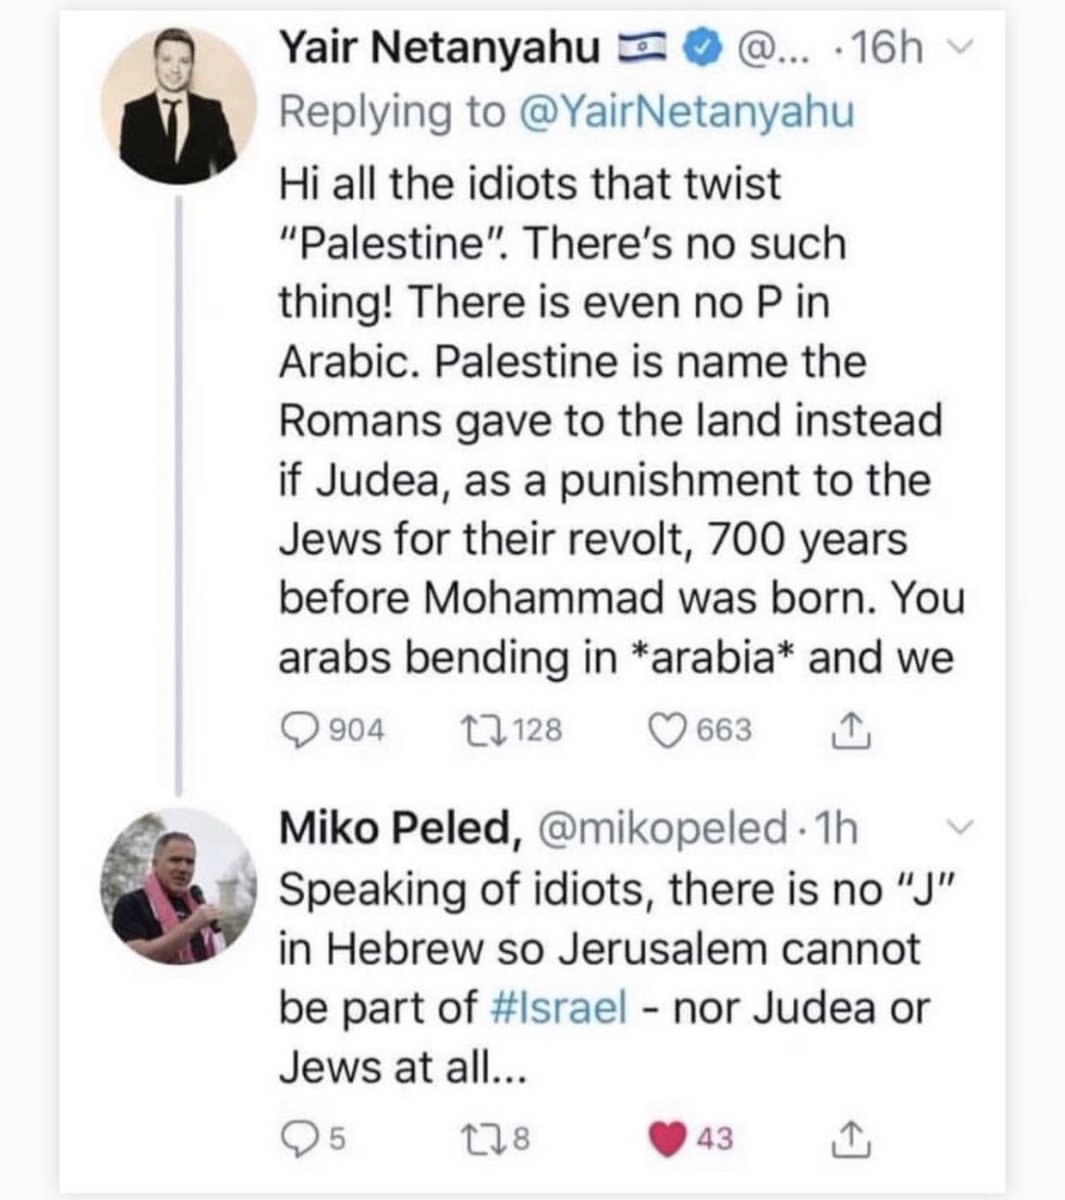 zionist arguments are easily refutable bc they are lame, but some actually refute it in style, like when @mikopeled refuted this zionist argument in the smoothest way ever 😂